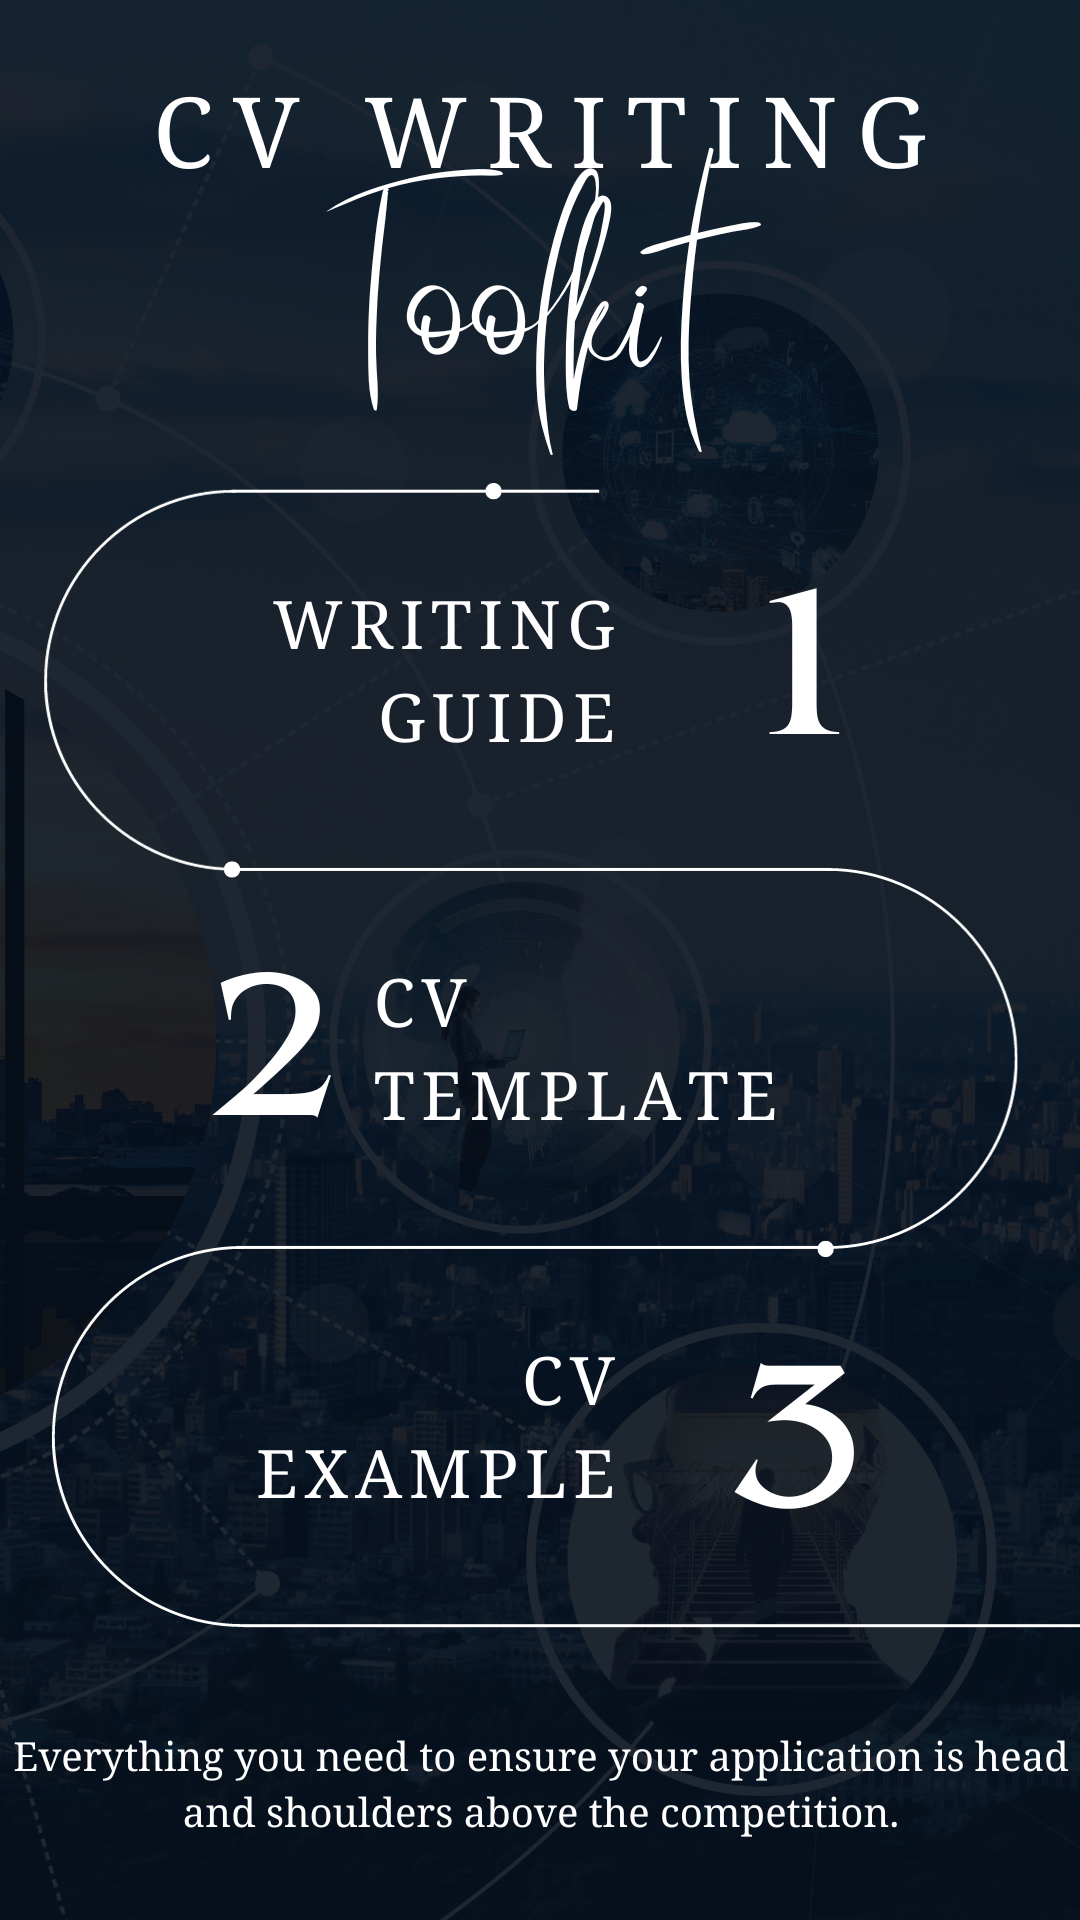 Public Relations Manager CV Writing Toolkit